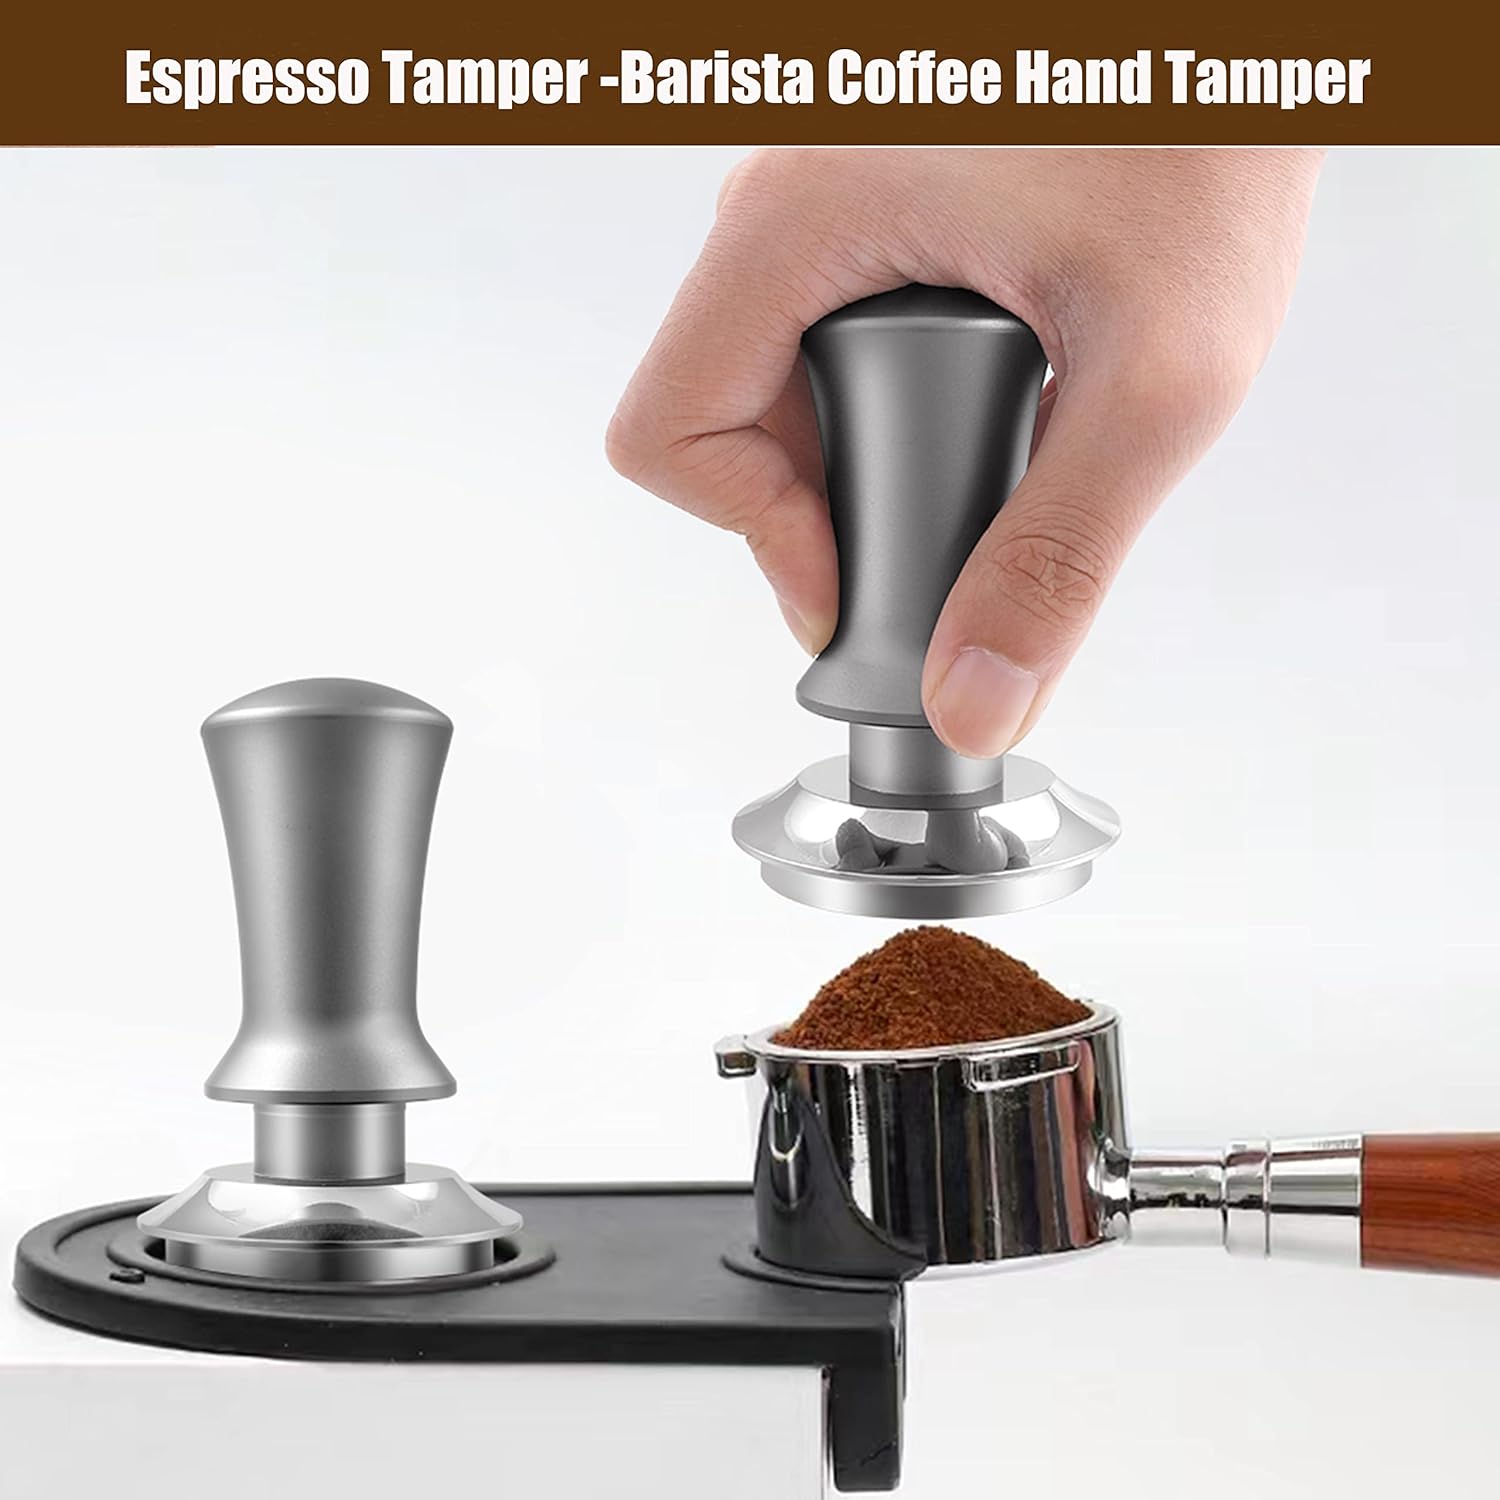 K COOL Espresso Hand Tamper, Premium Barista Coffee Tamper with Calibrated Spring, Stainless Steel Base Tamper Compatible with Espresso Machine Rancilio, Gaggia Bottomless Portafilter (58mm, Black)